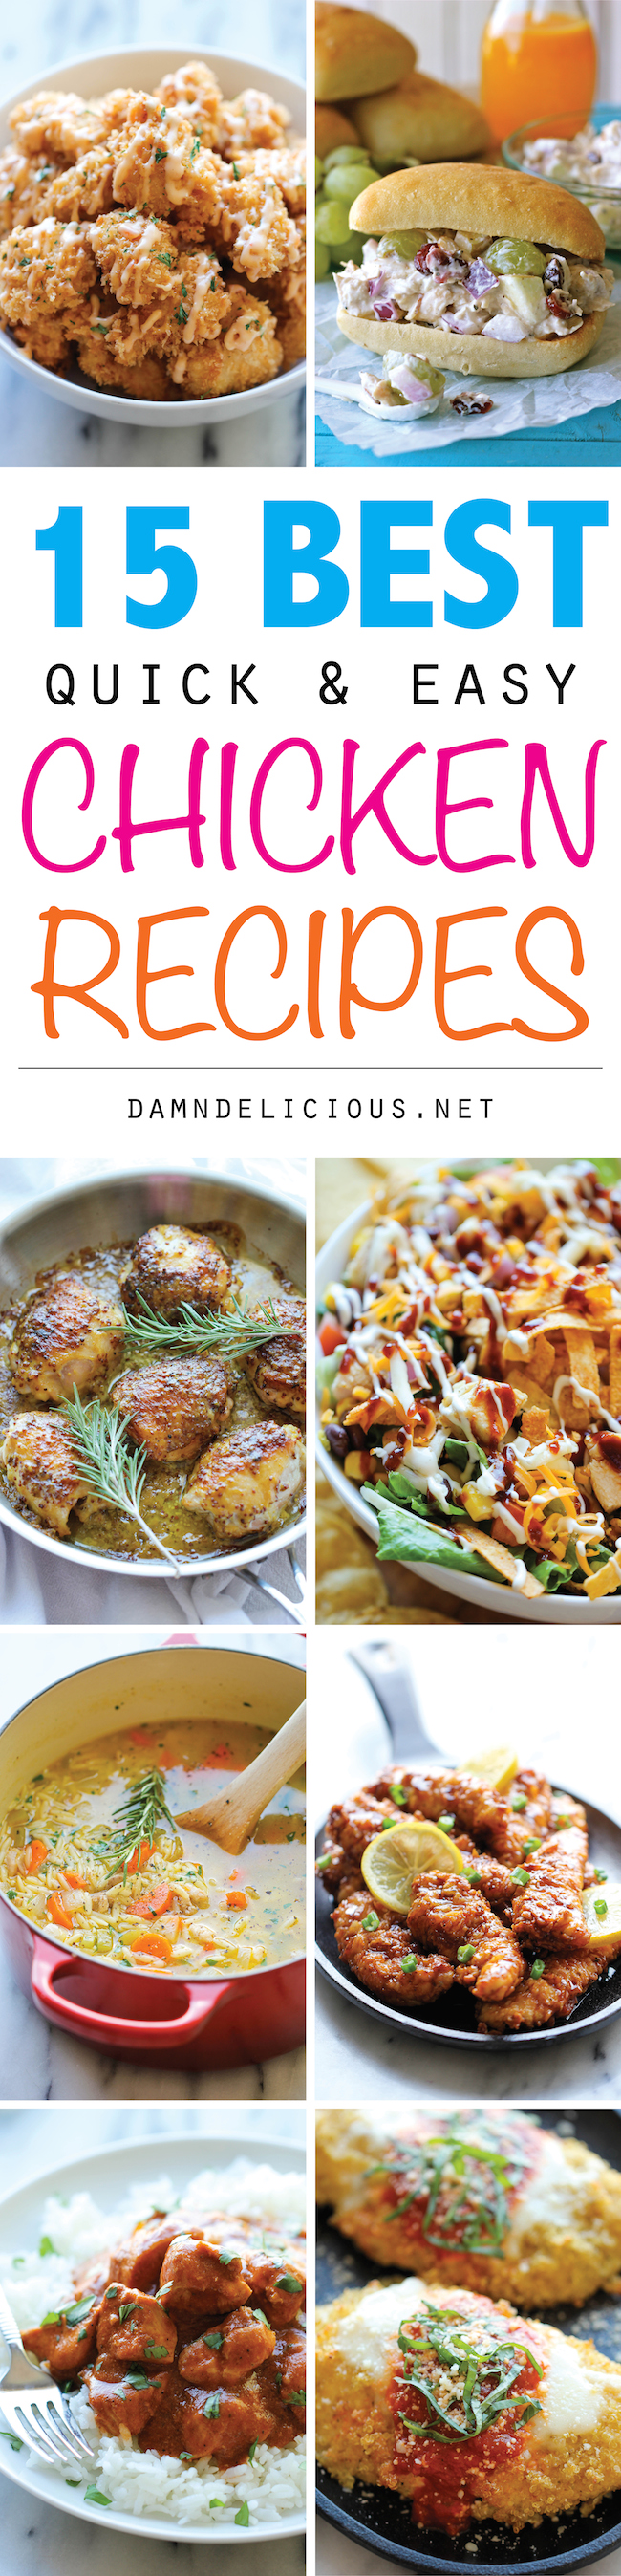 Recipes easy quick & Quick and